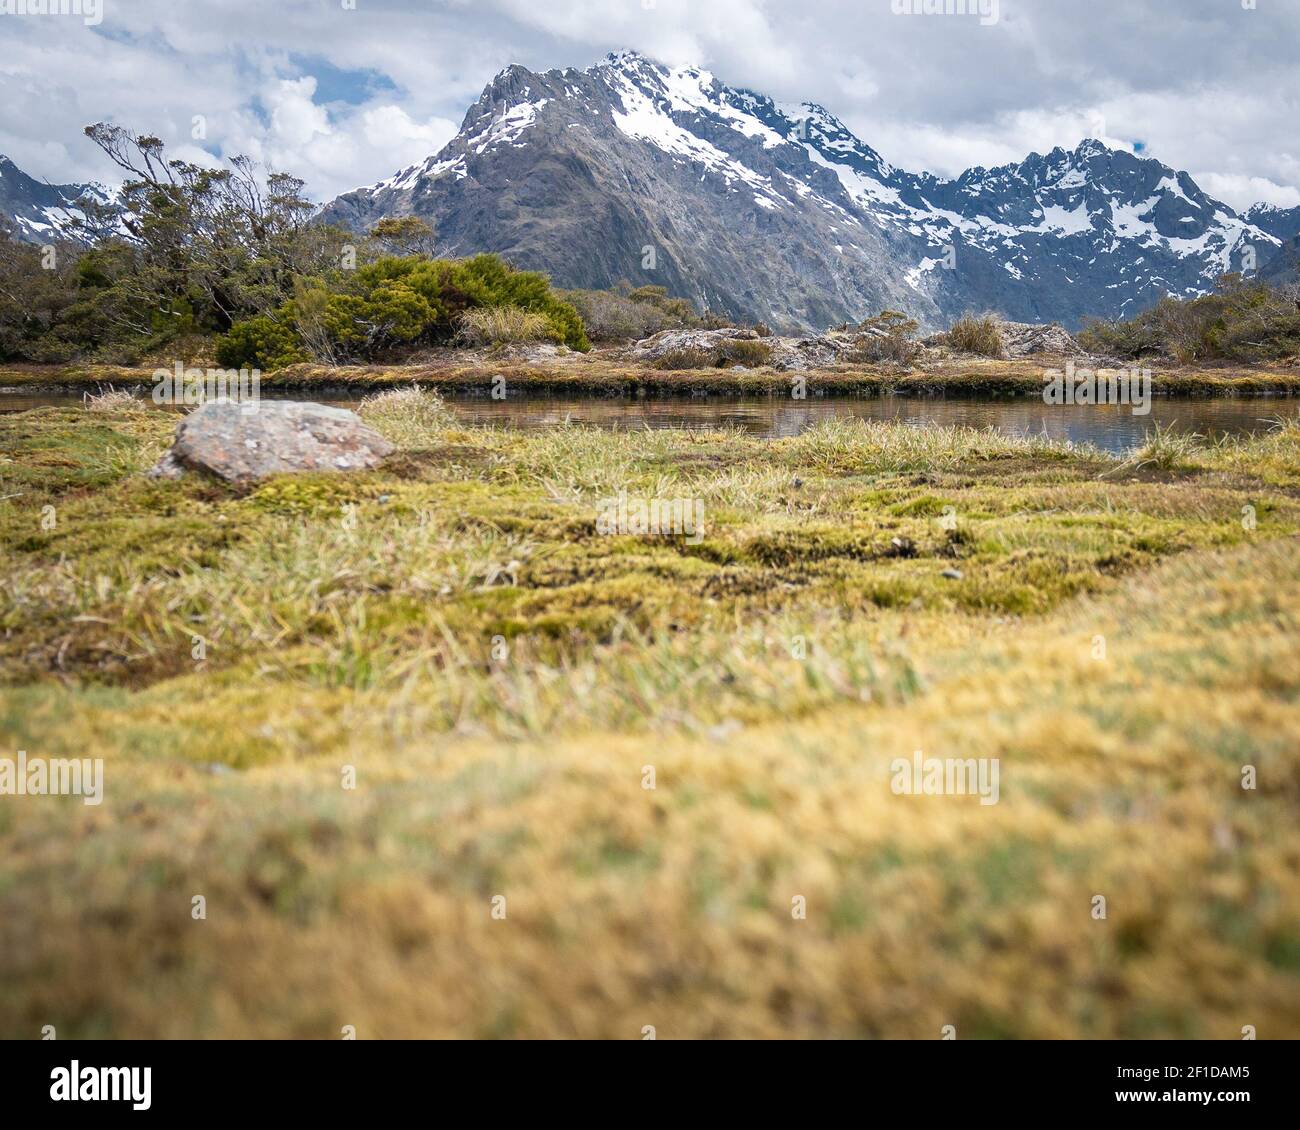 View on mountain peaks shrouded by clouds with dry grasses and small pond in foreground. Shot on Routeburn Track, New Zealand Stock Photo